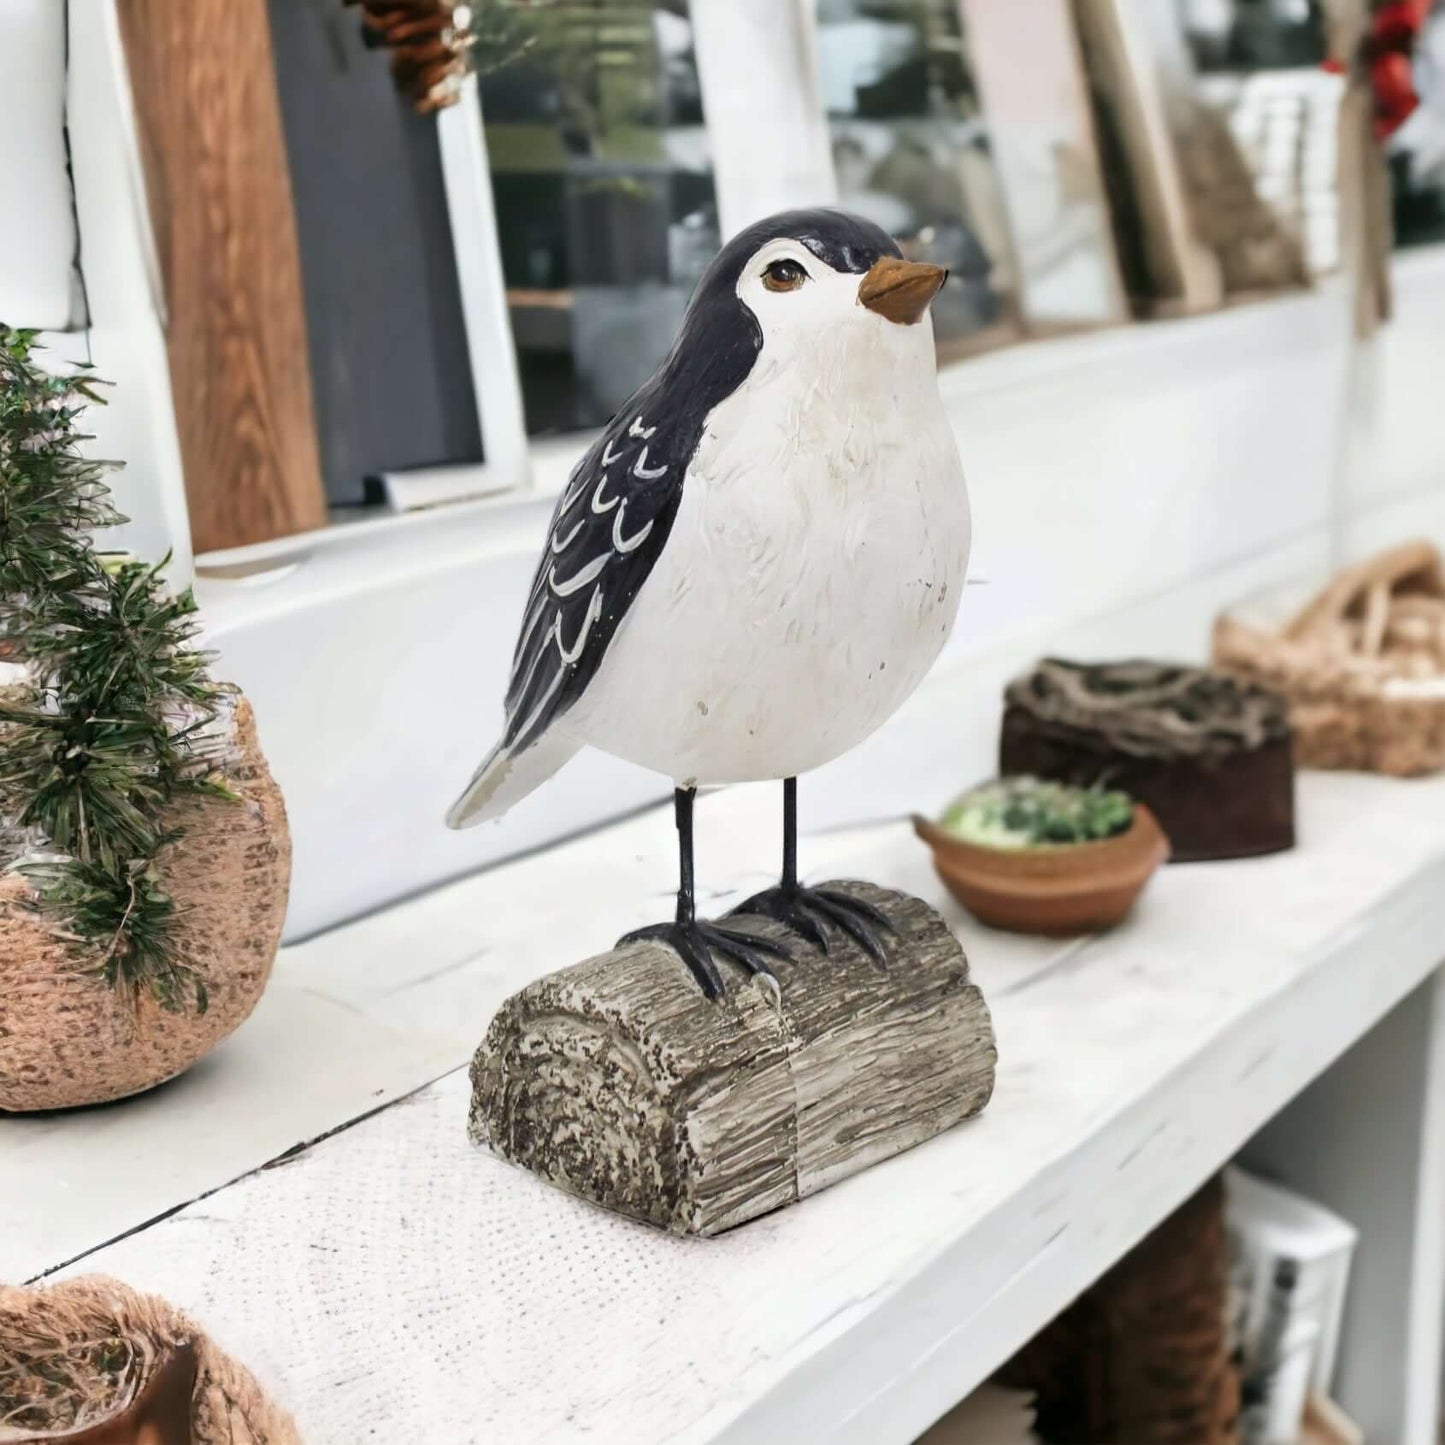 Bird on Wood Natural Ornament - The Renmy Store Homewares & Gifts 